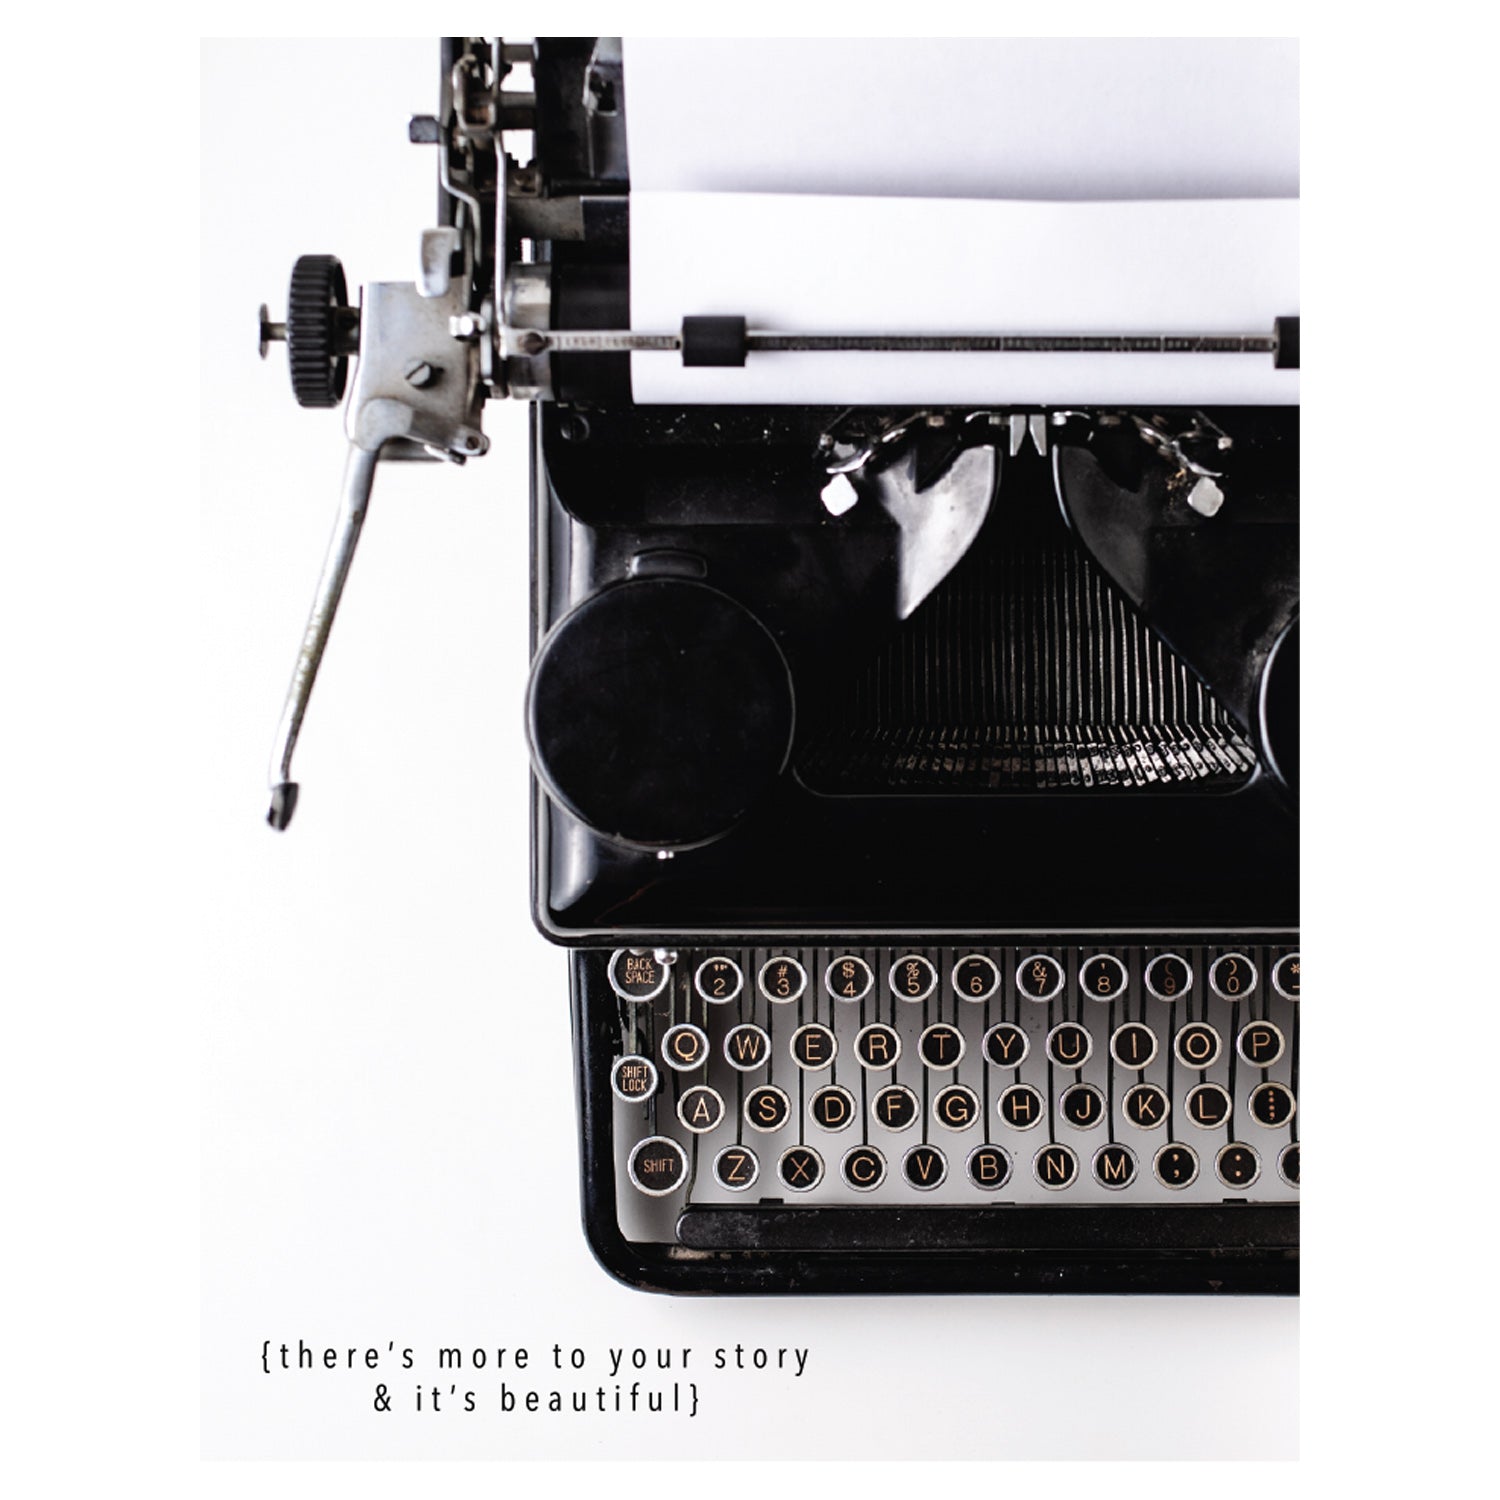 Product description: The &quot;Beautiful Story Card&quot; by Hester &amp; Cook is a beautifully designed typewriter with an original photography print featuring the words, &quot;there&